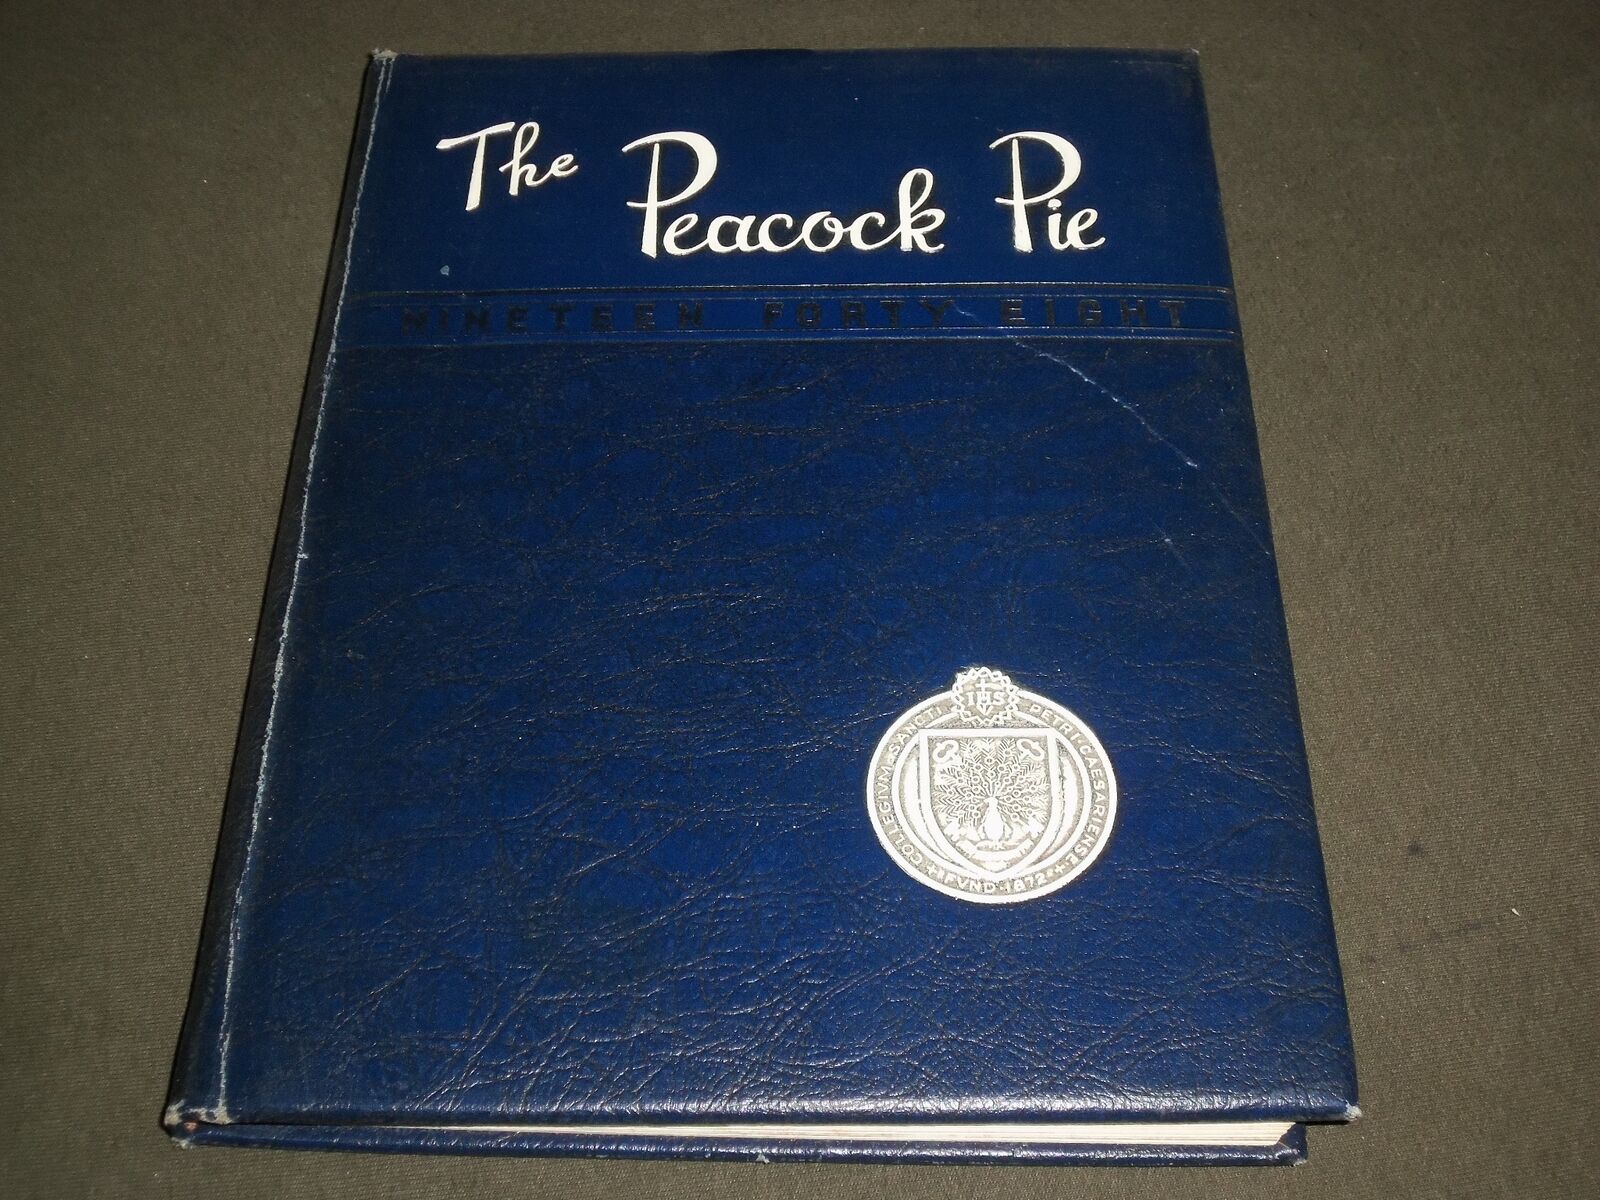 1948 THE PEACOCK PIE ST. PETER\'S COLLEGE YEARBOOK - JERSEY CITY NJ - YB 1123